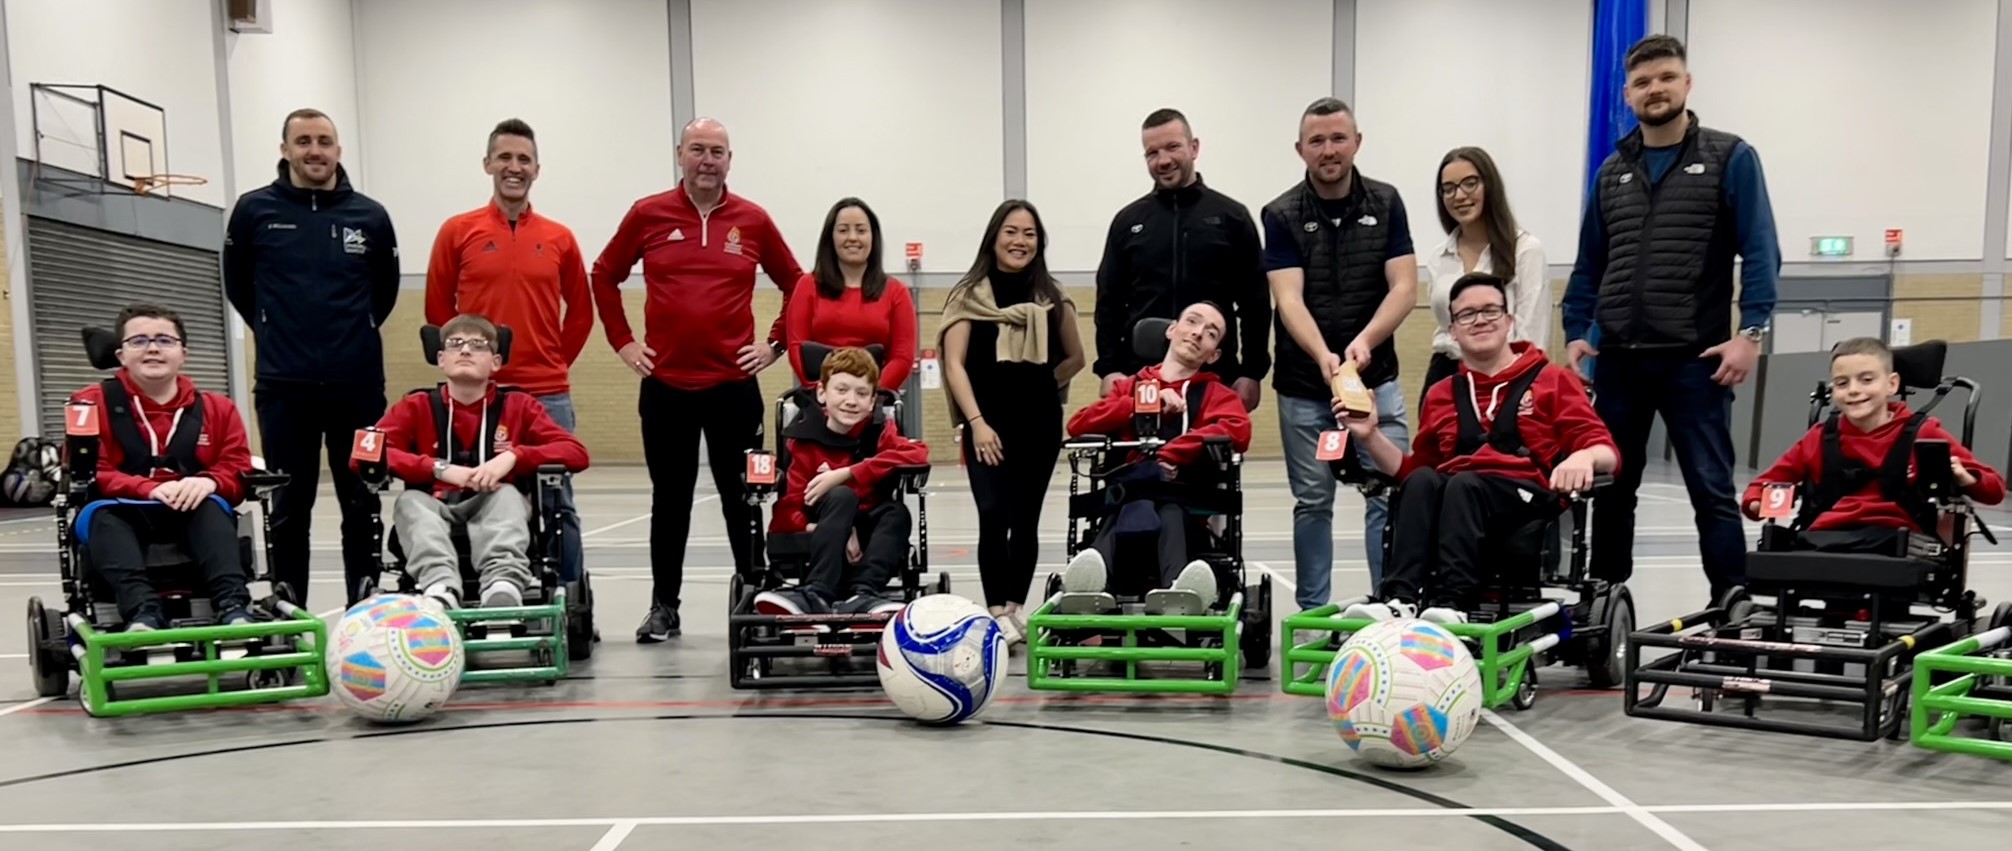 Award hand over with Trailblazers powerchair football club. Full squad are sat in their powerchairs in the first row, with club staff and representatives from ParalympicsGB, DSNI, Every Body Moves and Toyota stood behind. Photo taken in an indoor sports hall.